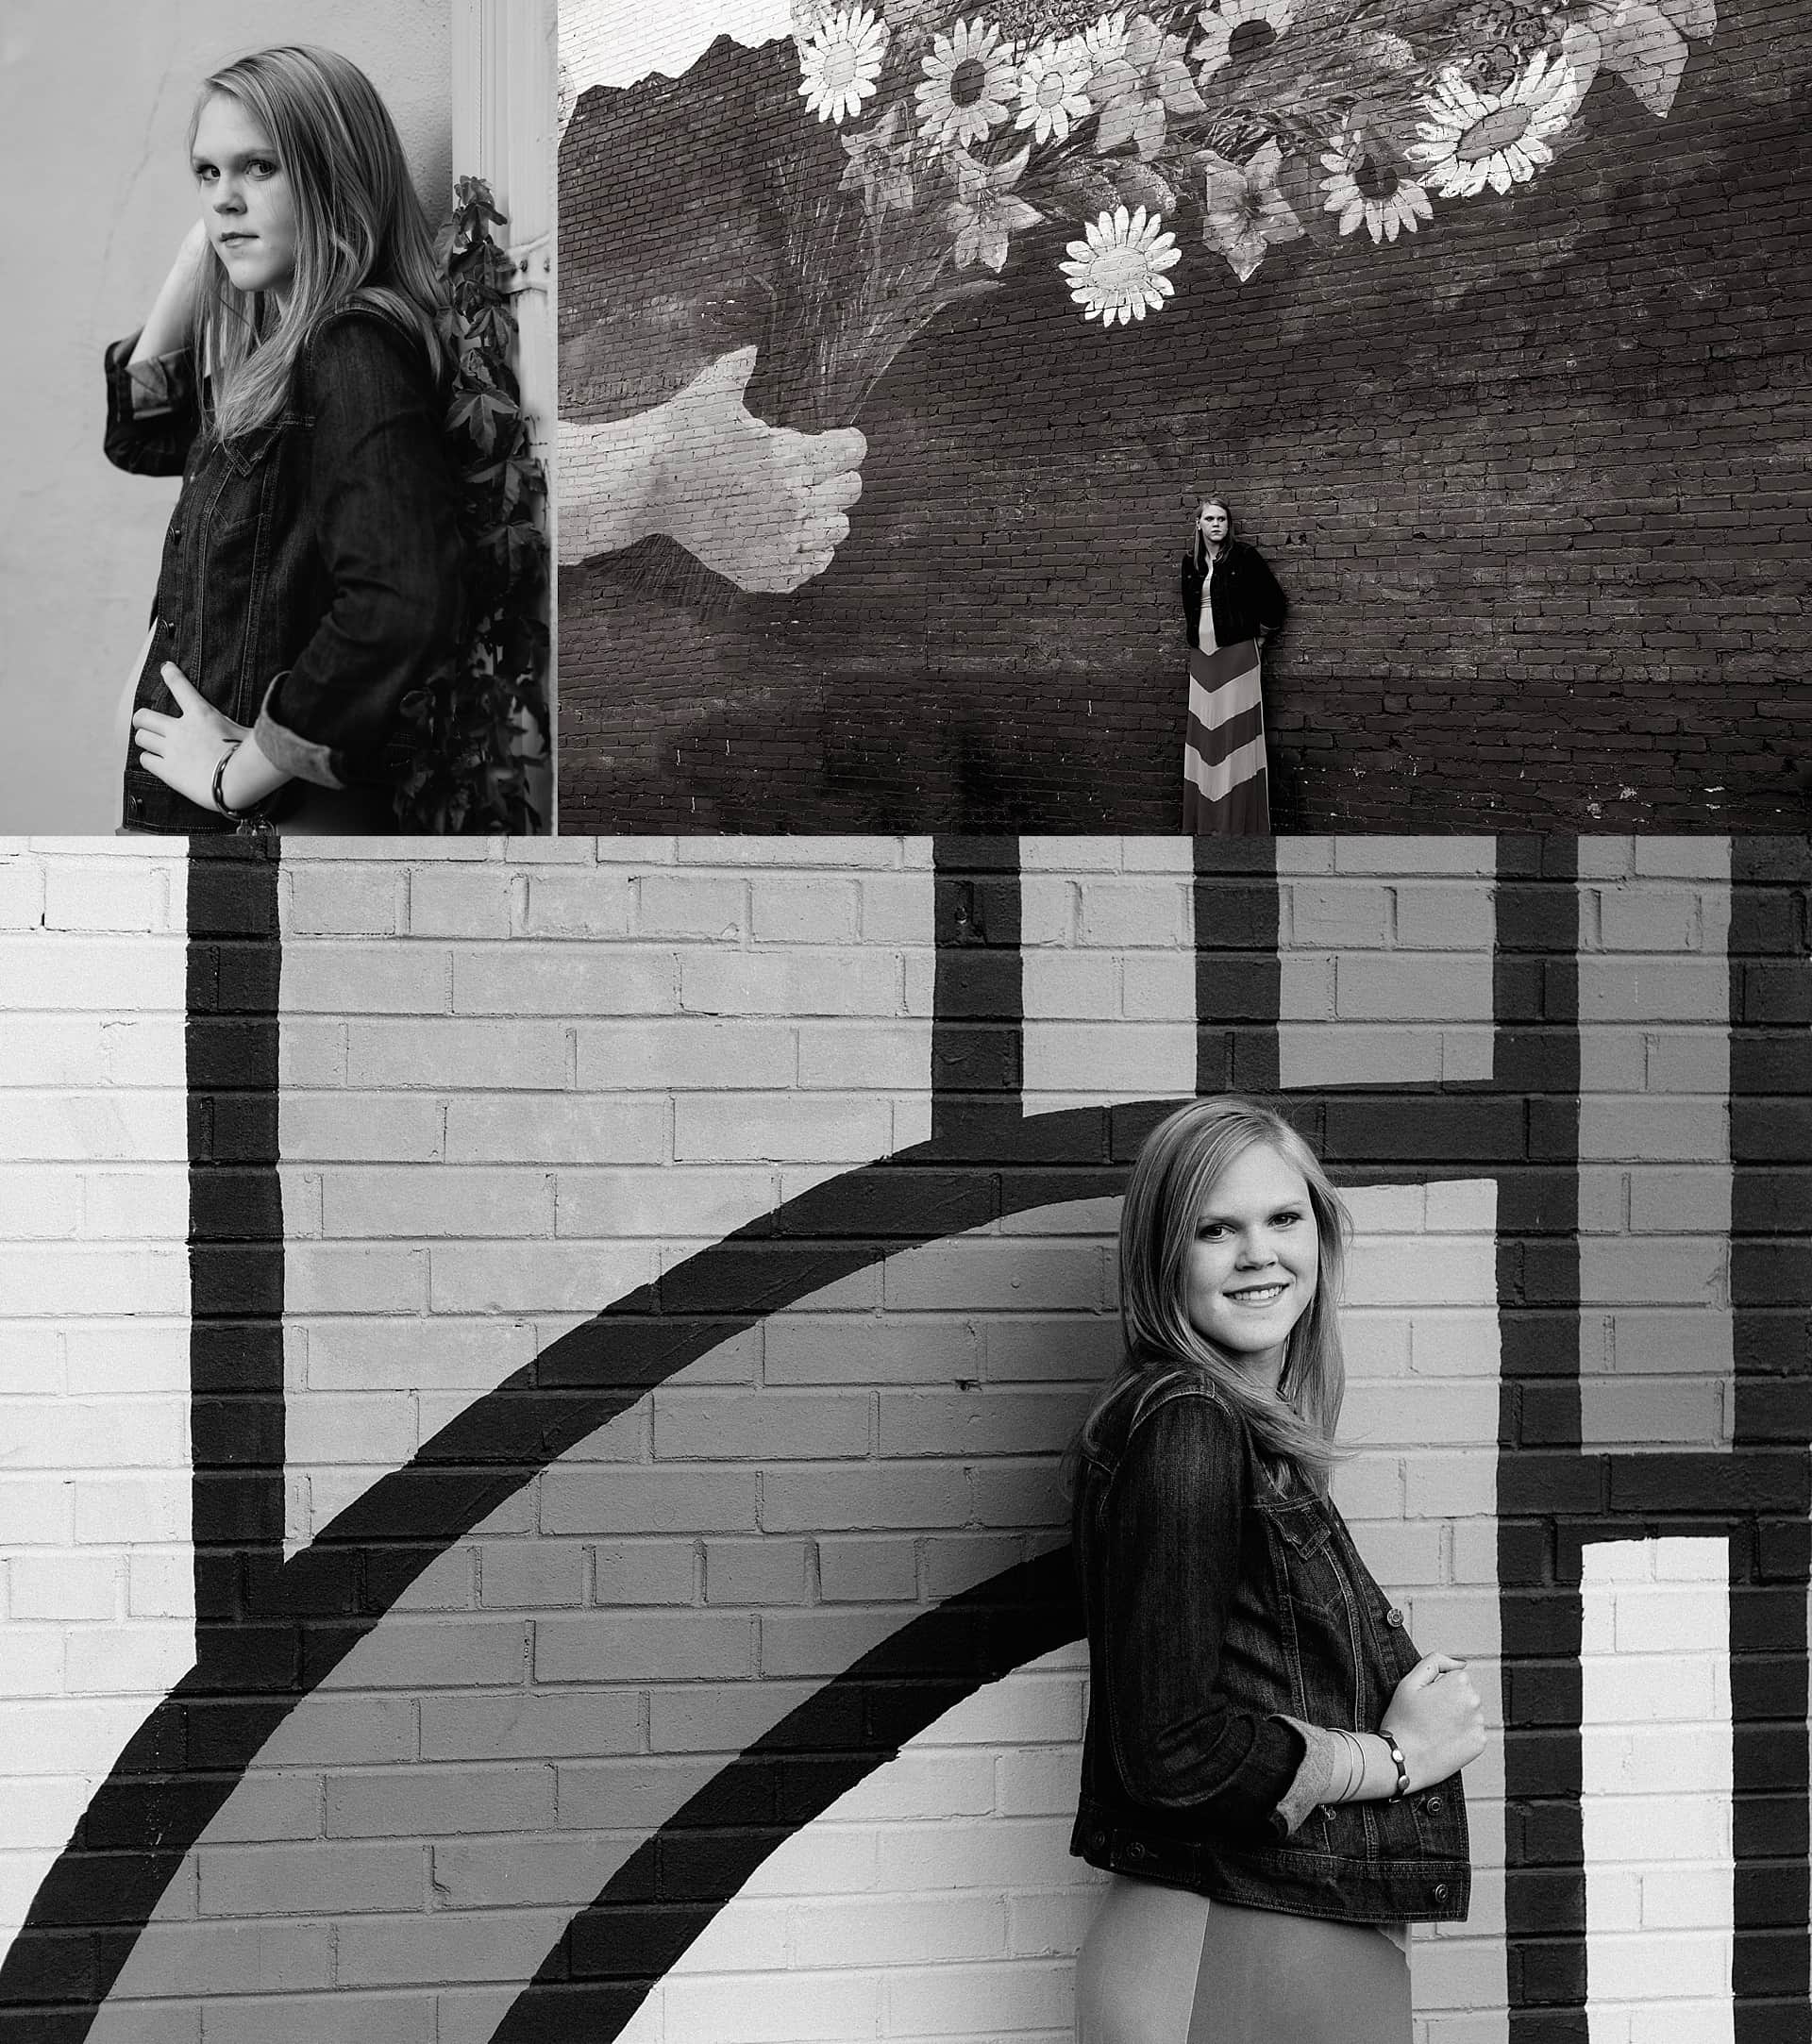 Senior pictures in front of brick wall, black and white